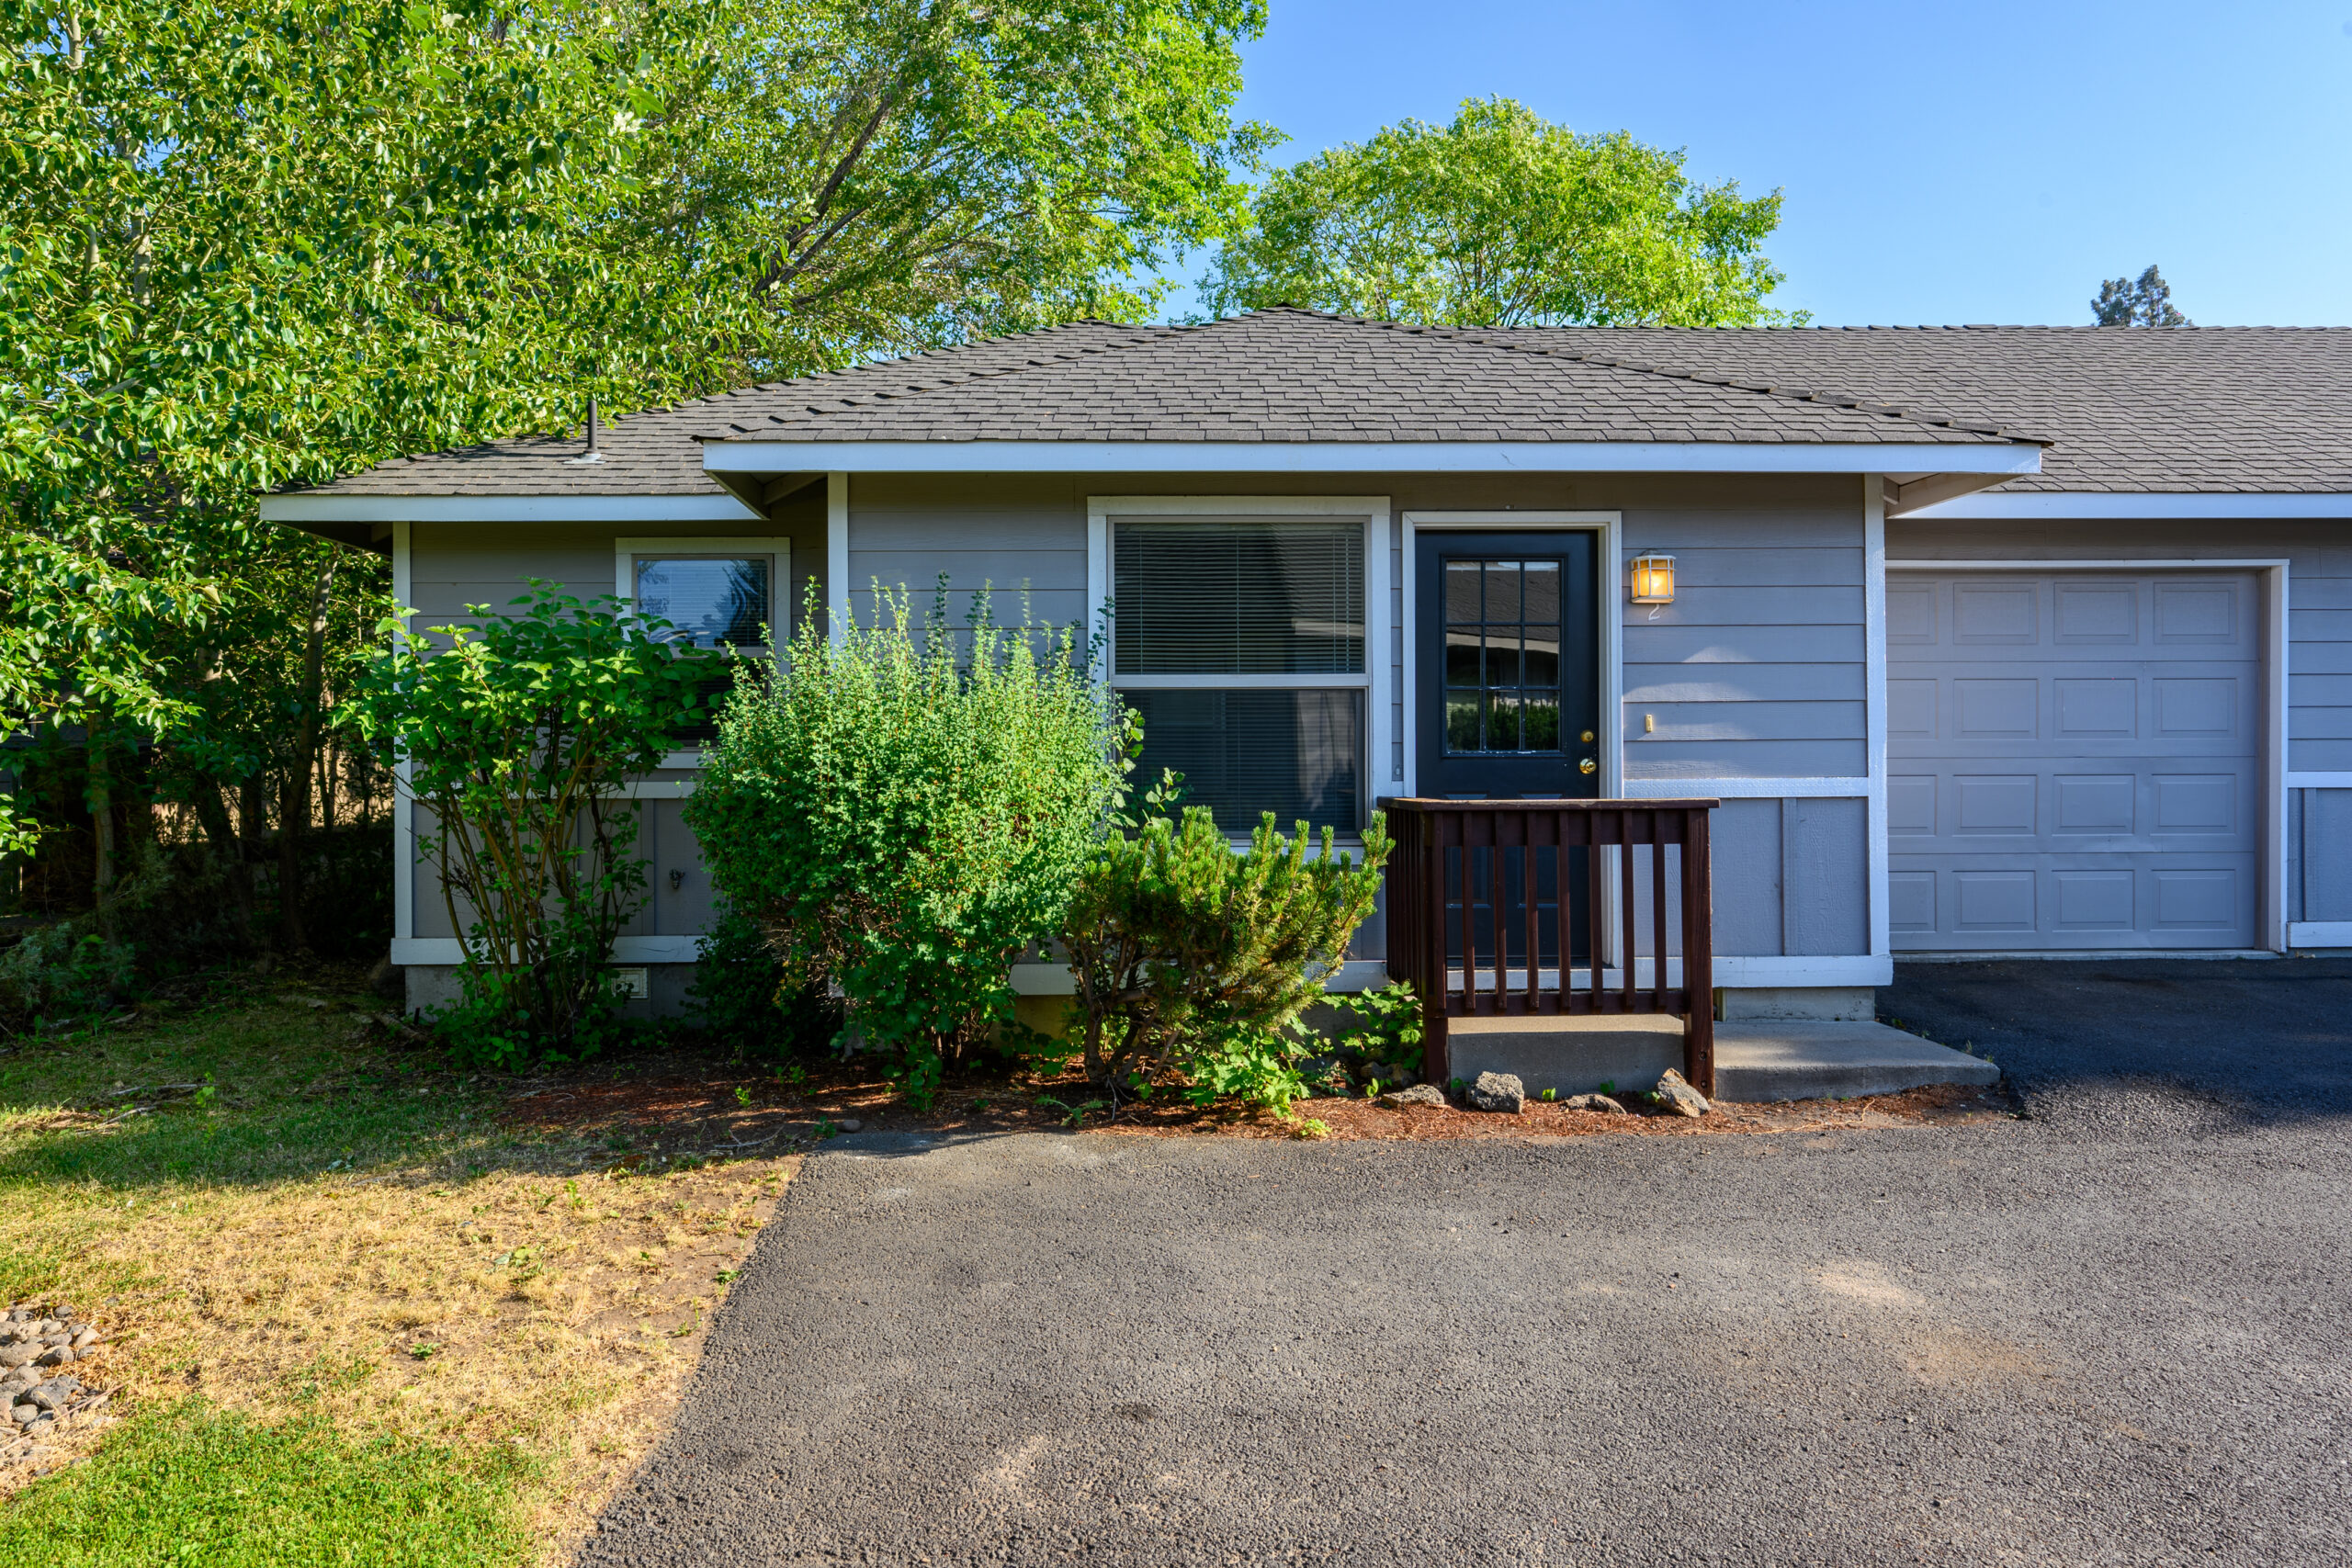 This is a two bedroom duplex rental in NE Bend, Oregon with an attached single car garage.